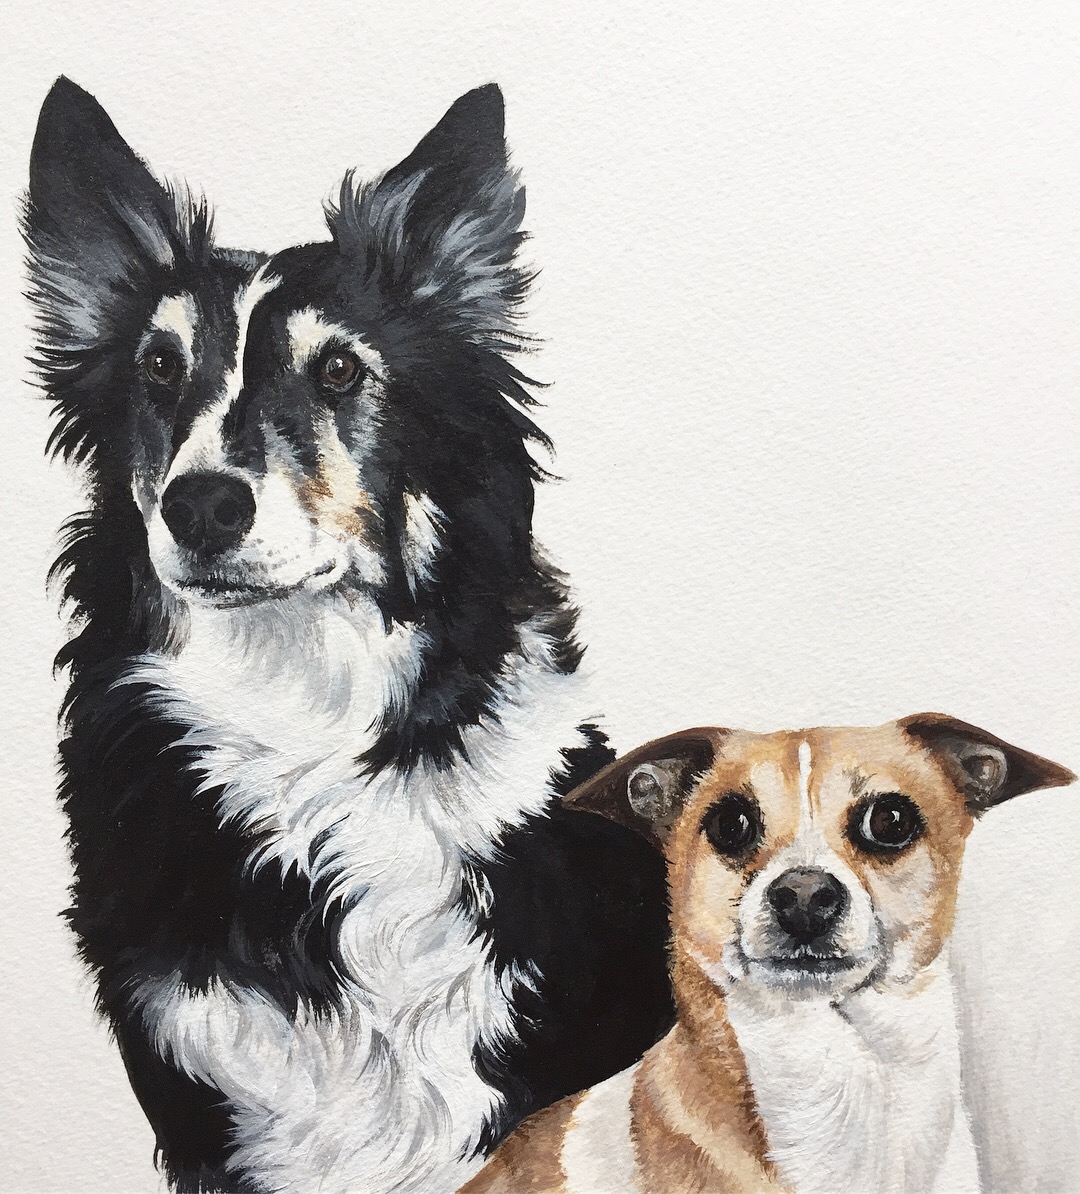 Max and Ricky, commissioned for a wedding gift.